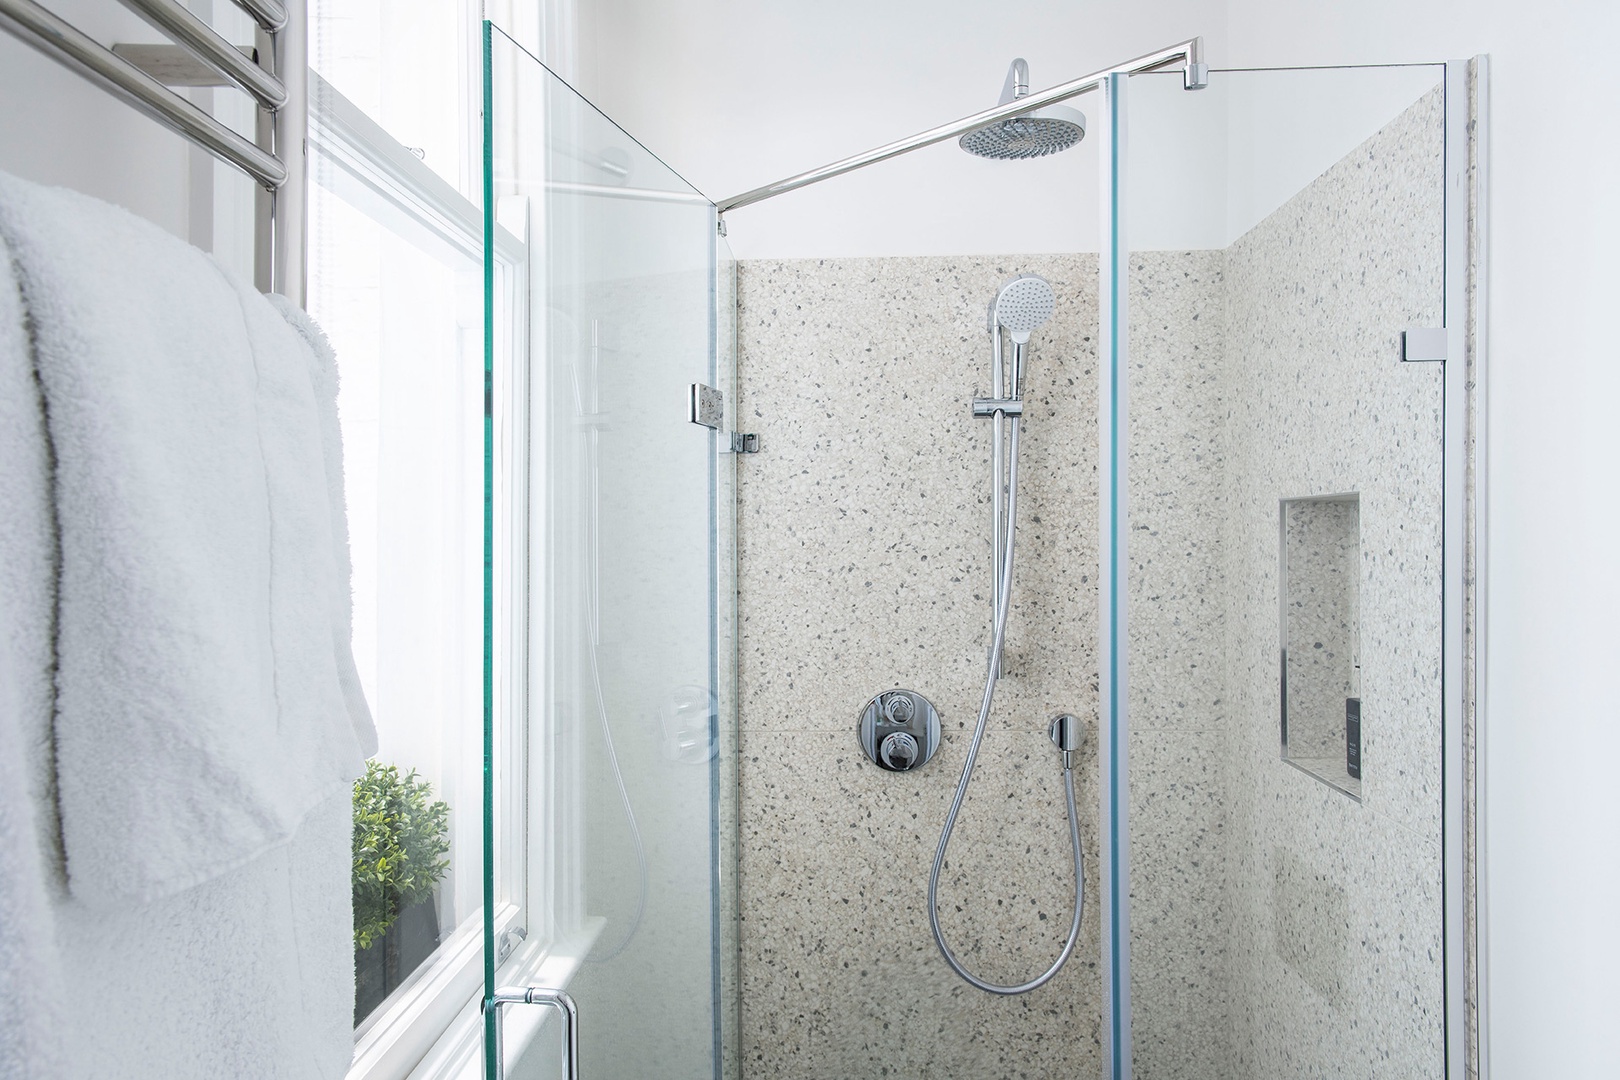 Bathroom 2 features a combination rain and hand-held shower heads.